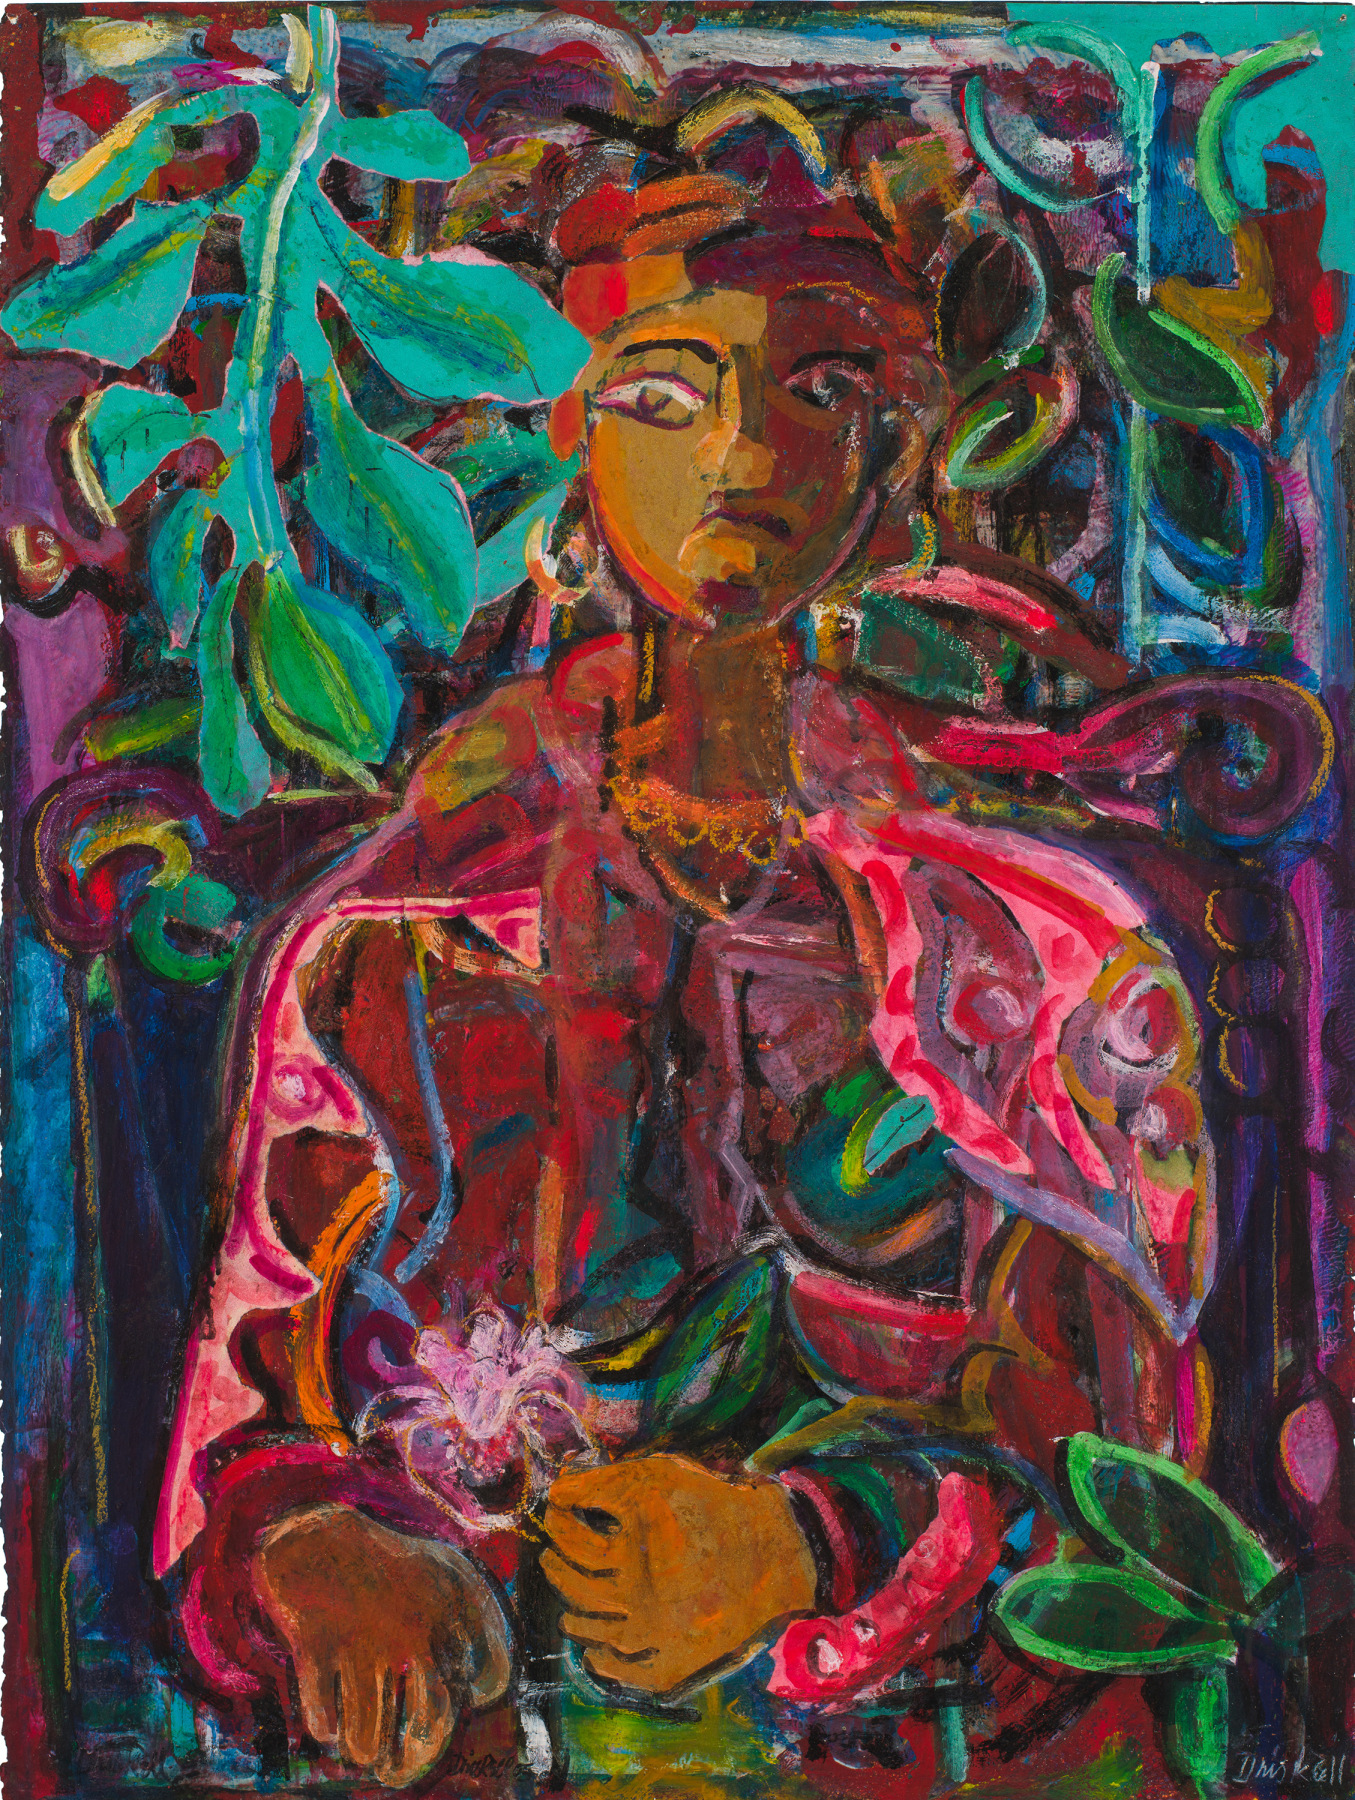 David Driskell: Mystery of the Masks - February 17 - March 26, 2022 - Viewing Room - DC Moore Gallery Viewing Room